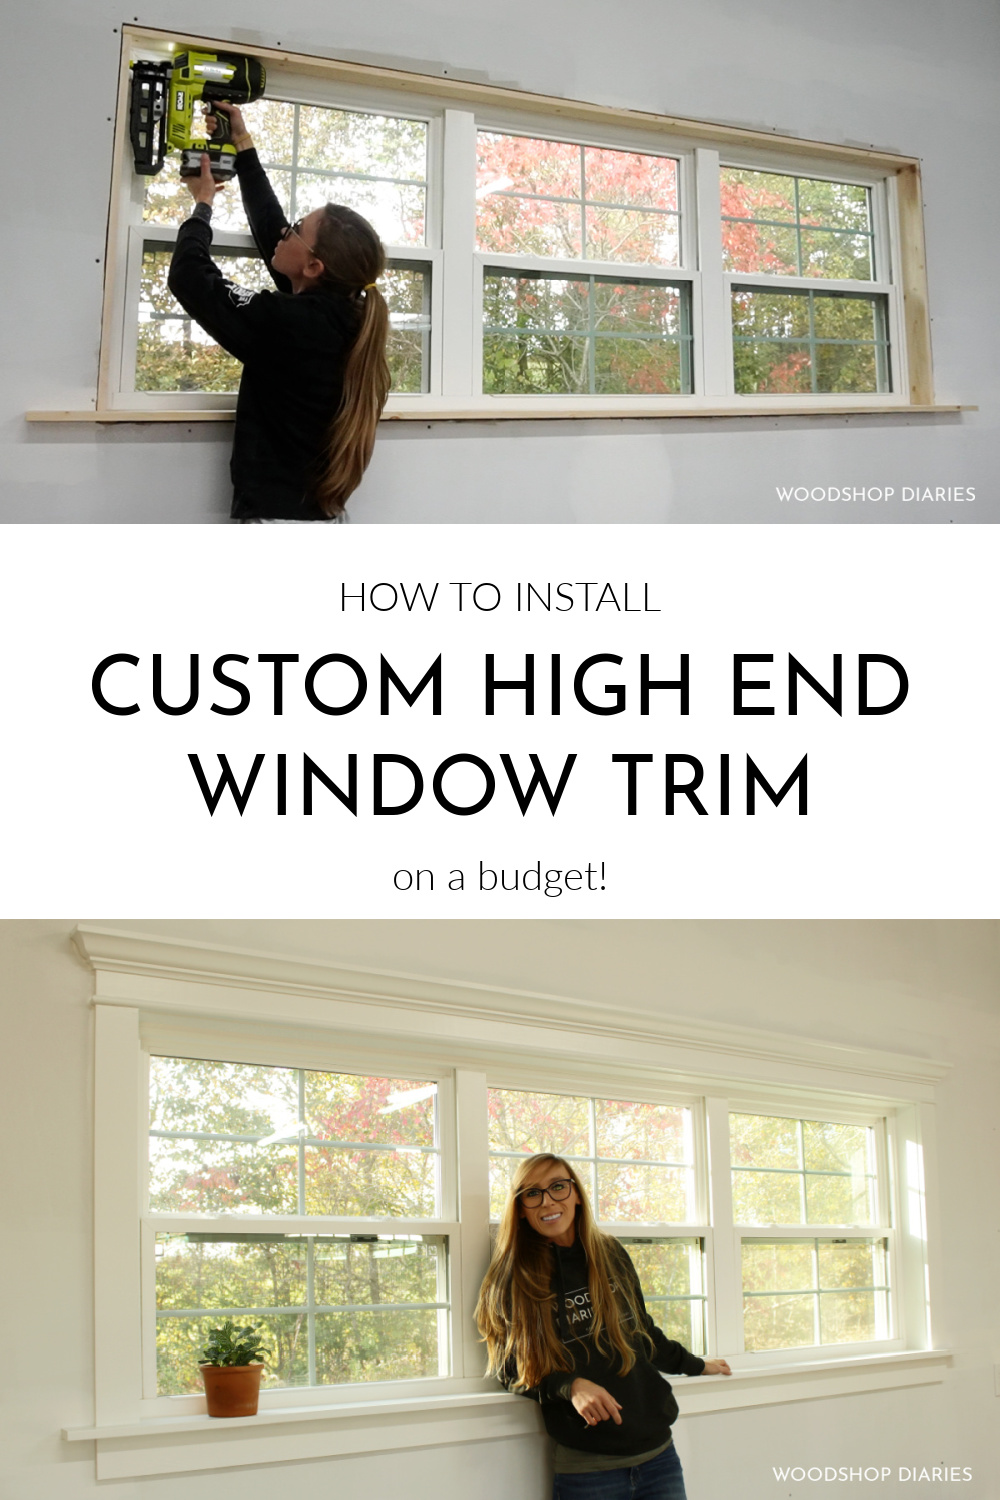 Pinterest collage showing Shara Woodshop Diaries at top nailing window trim pieces in place and finished window trim with crown molding at bottom with text "how to install custom high end window trim"